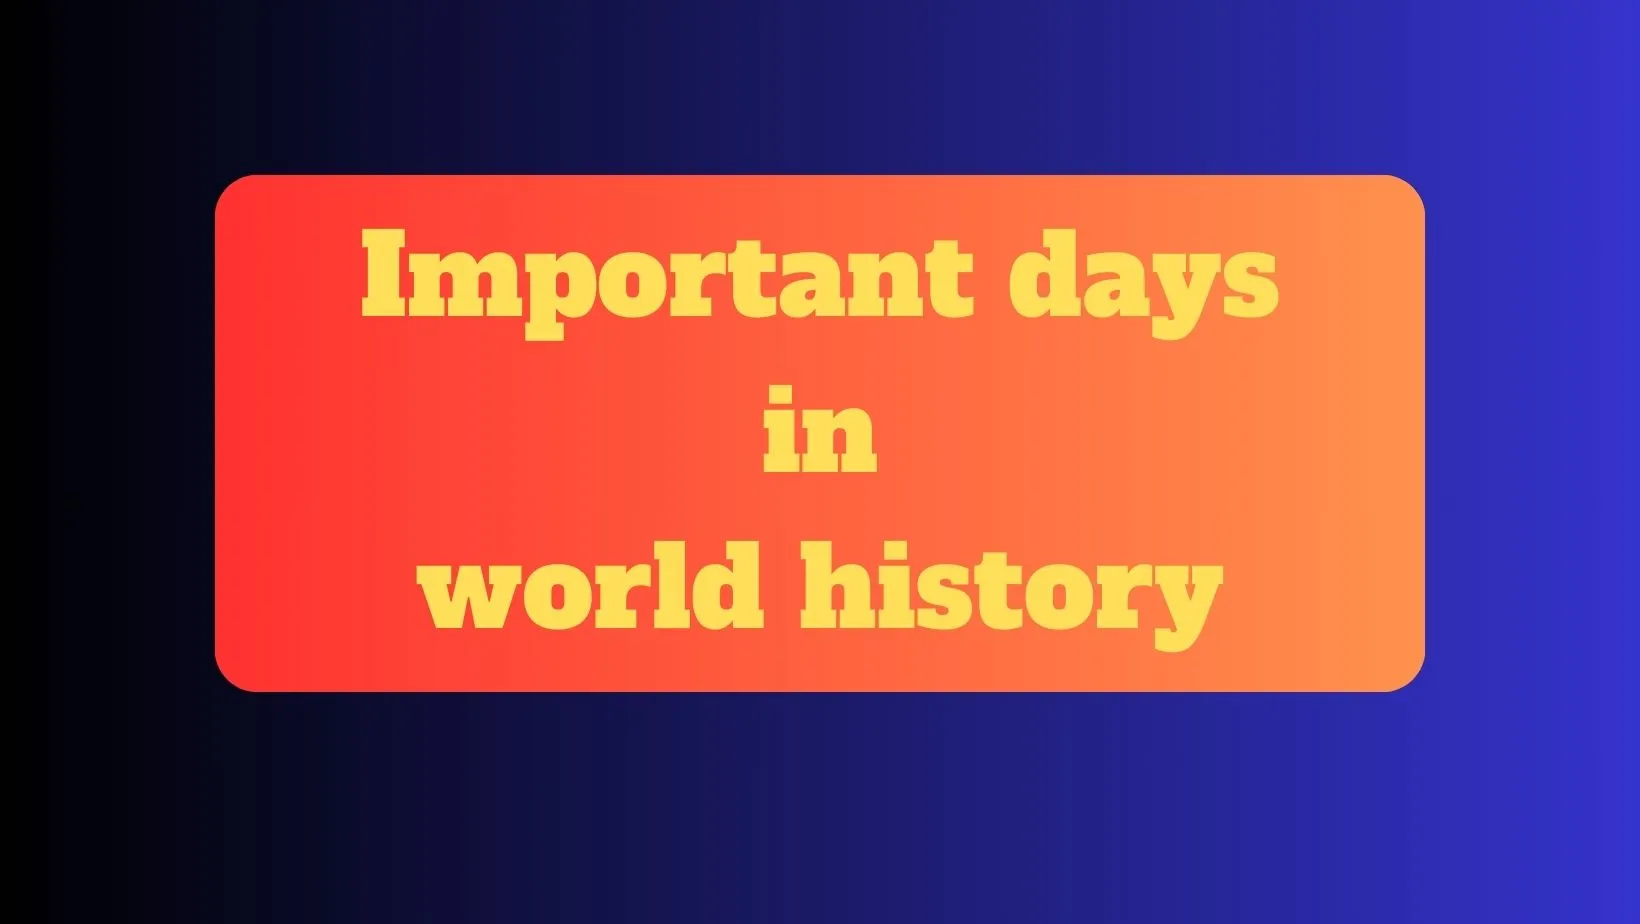 Important days in world history